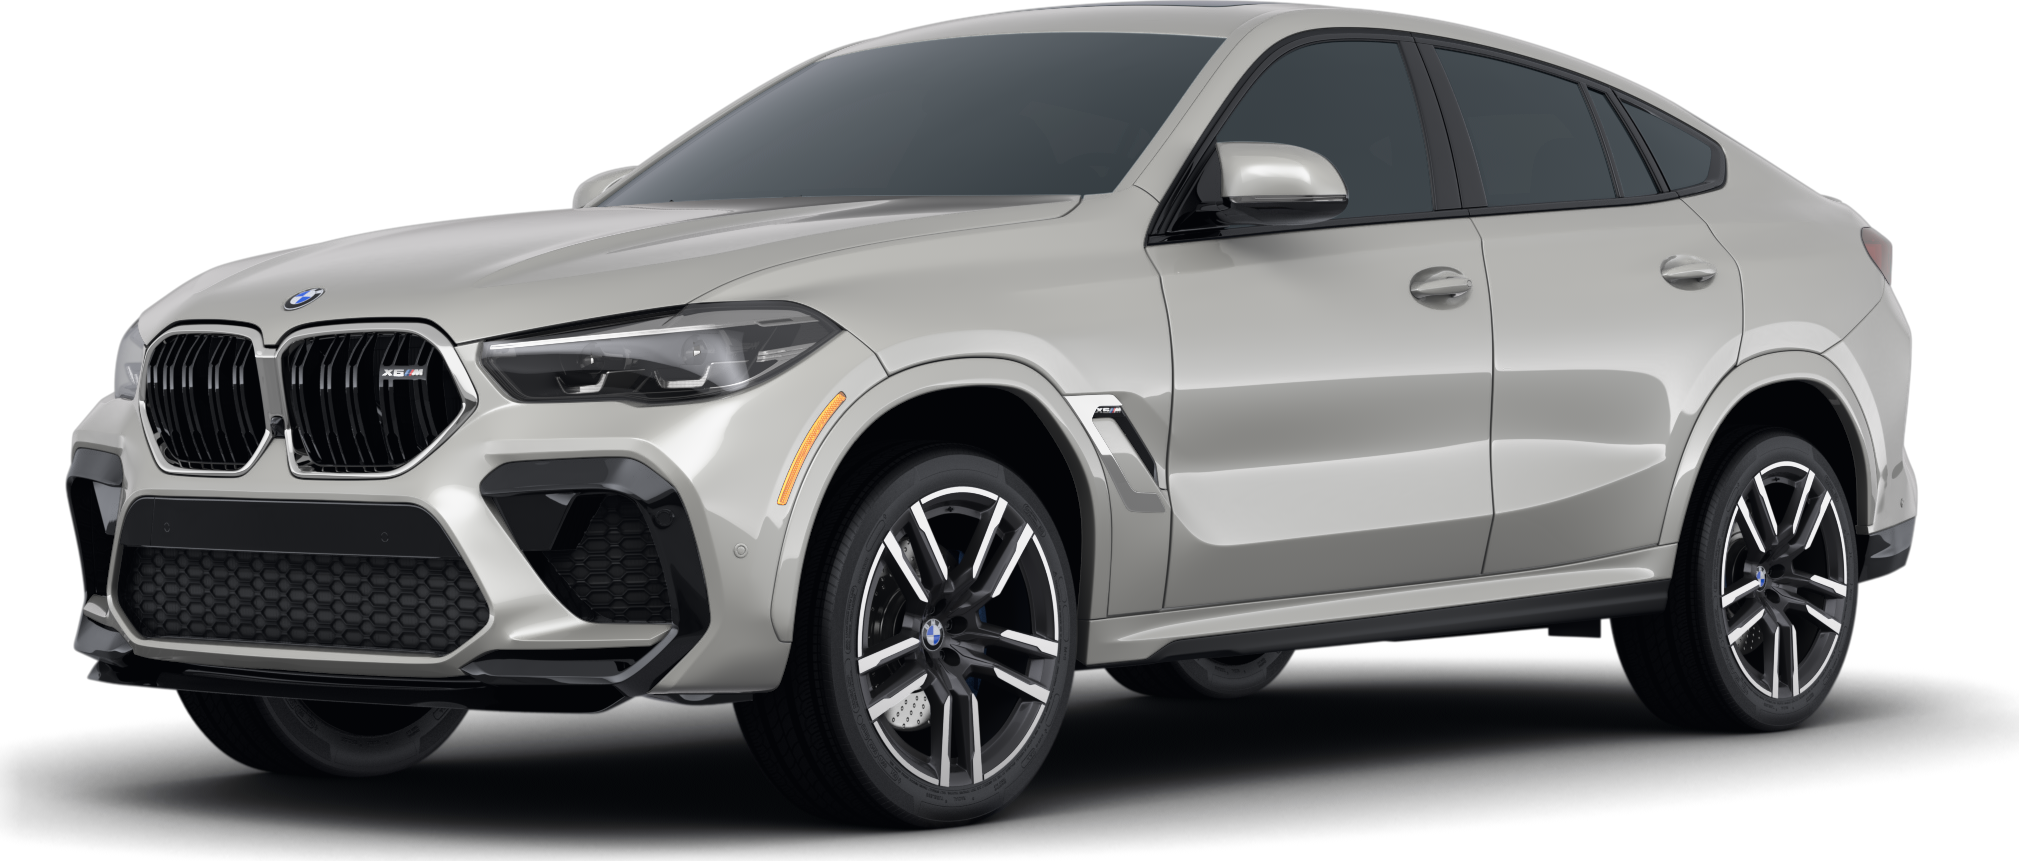 Bmw X6: Most Up-to-Date Encyclopedia, News & Reviews